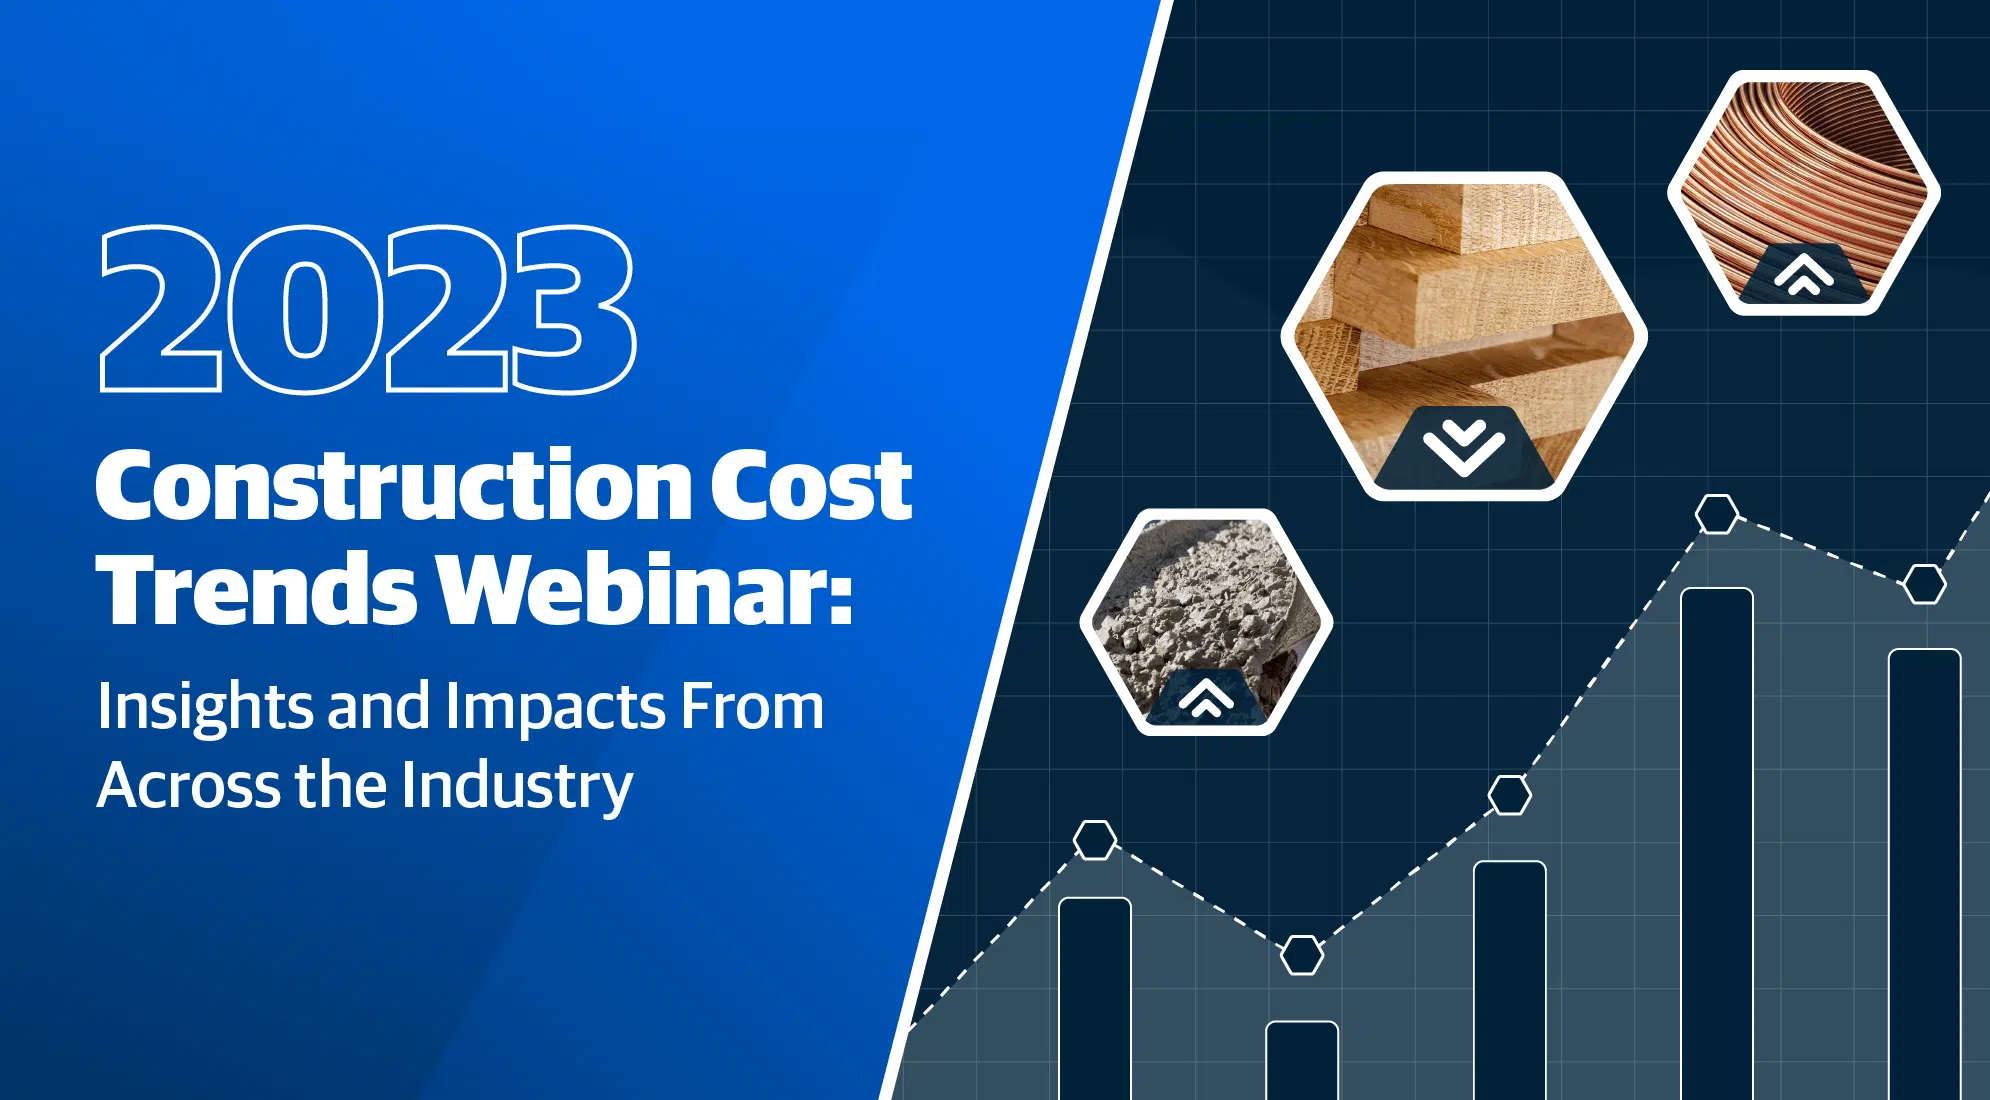 2023 Construction Cost Trends: Insights and Impacts from Across the Industry 3